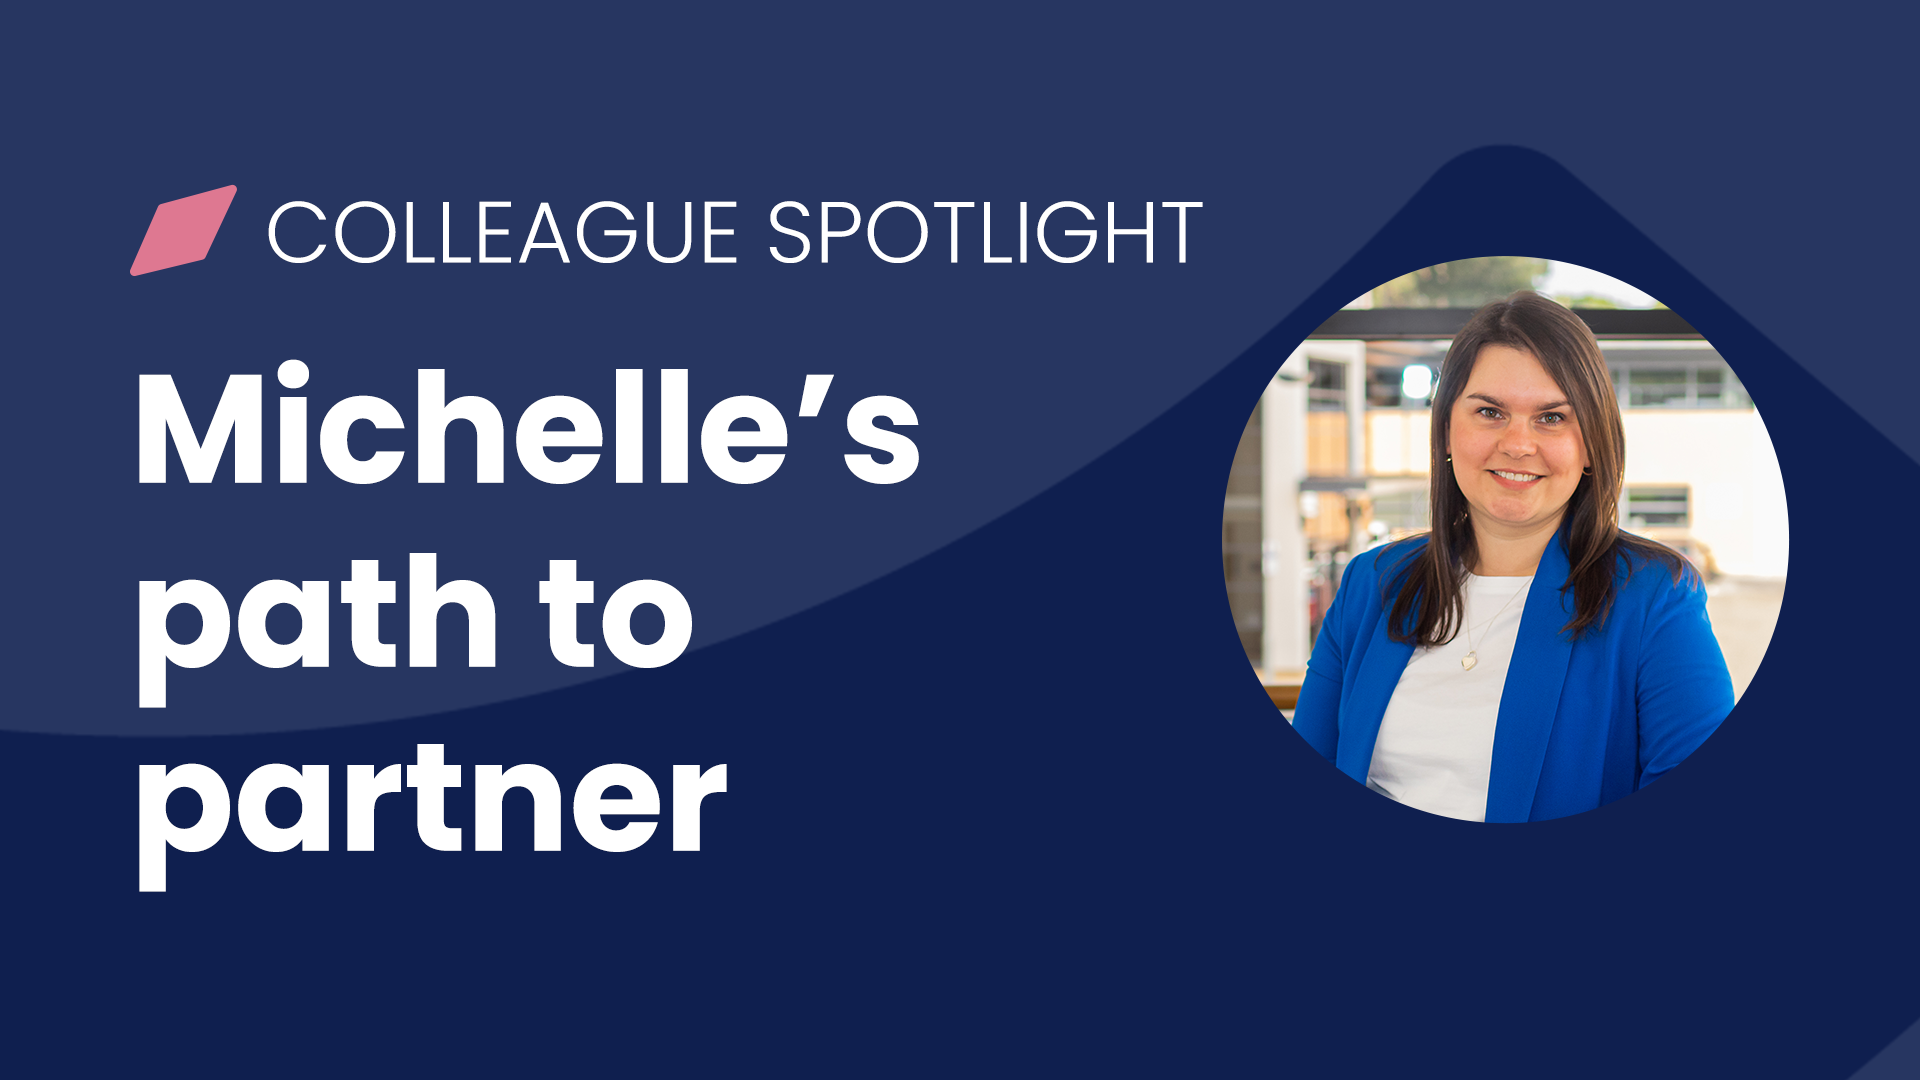 Michelle’s path to partner at CFG